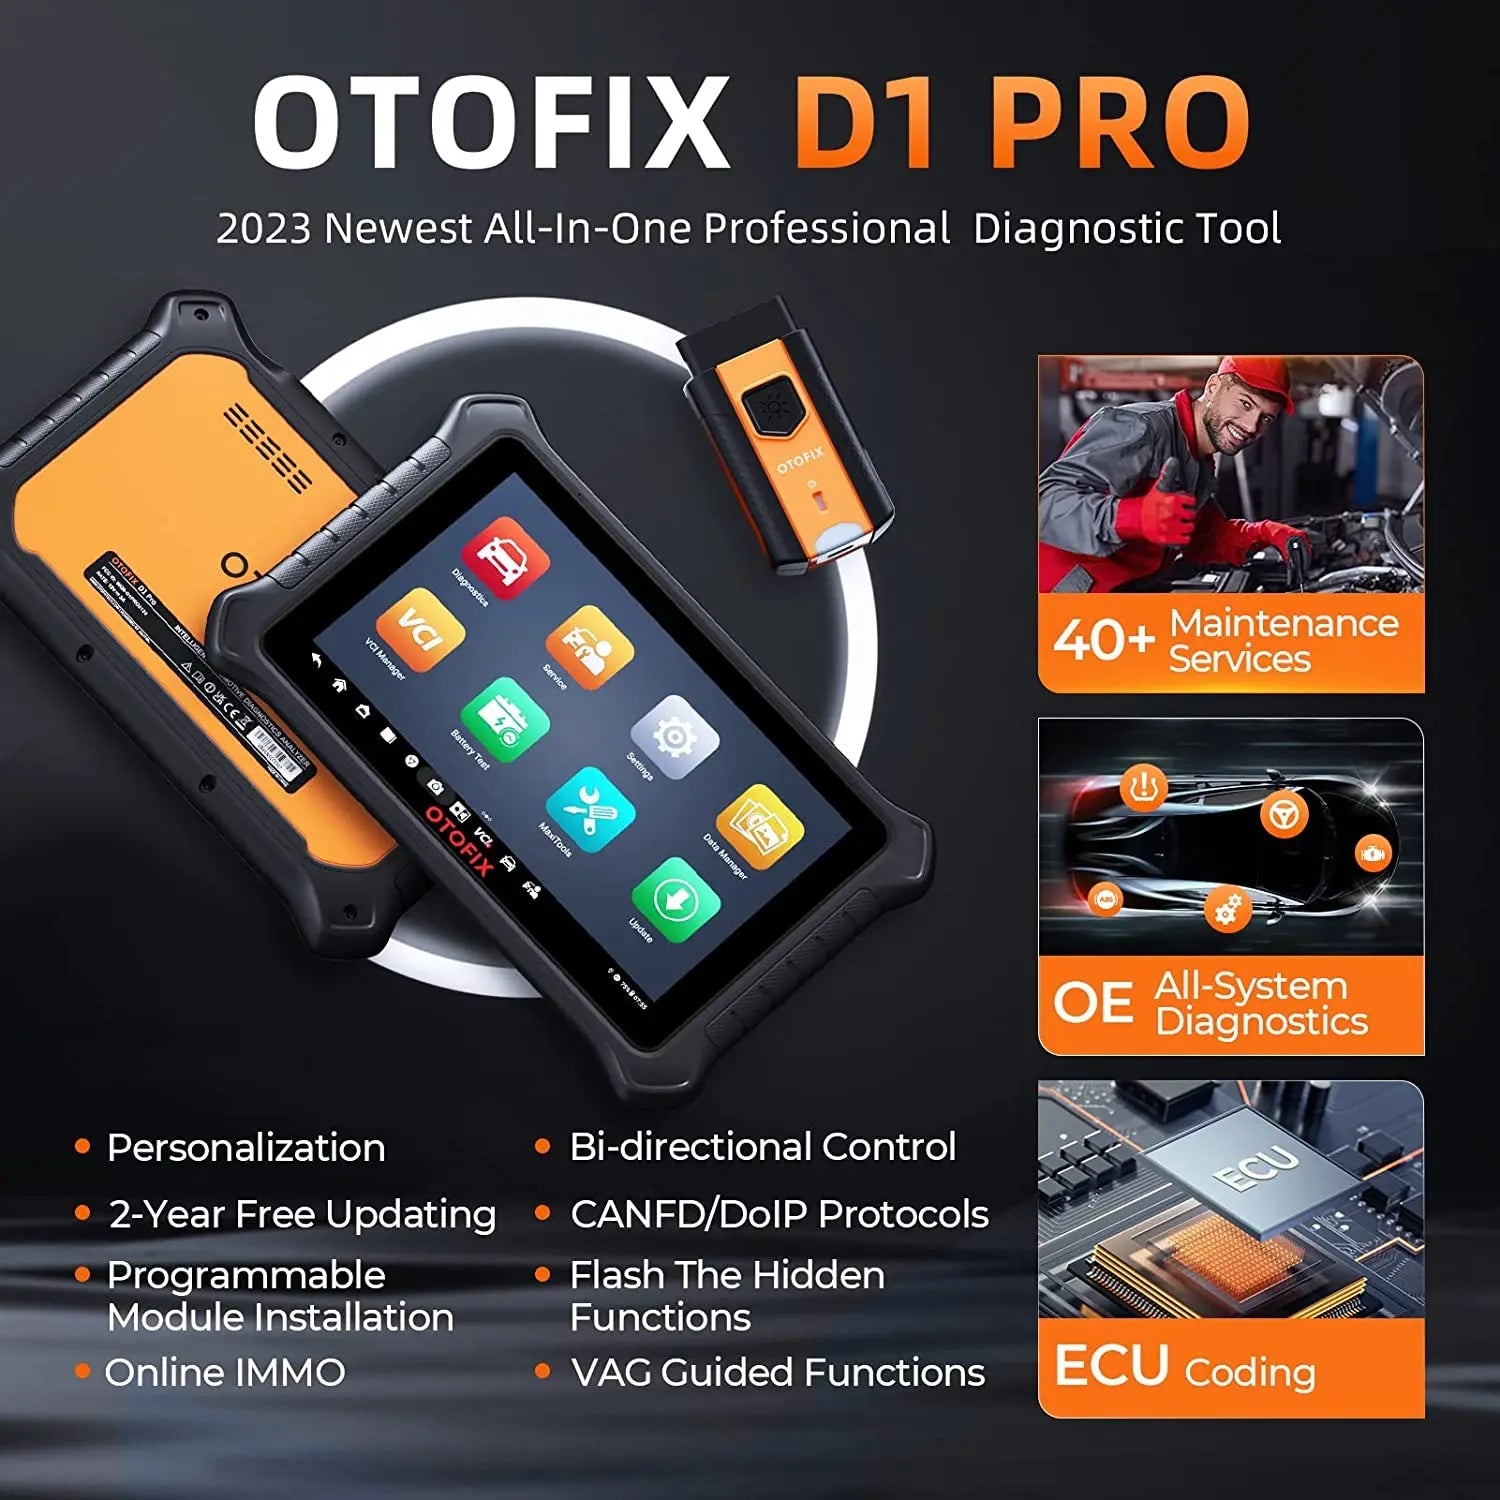 OTOFIX D1 PRO Diagnostic Scanner ECU Coding Bi-Directional Control Diagnostic Tools CANFD DoIP 2 Years Update Guided Functions - Dynamex